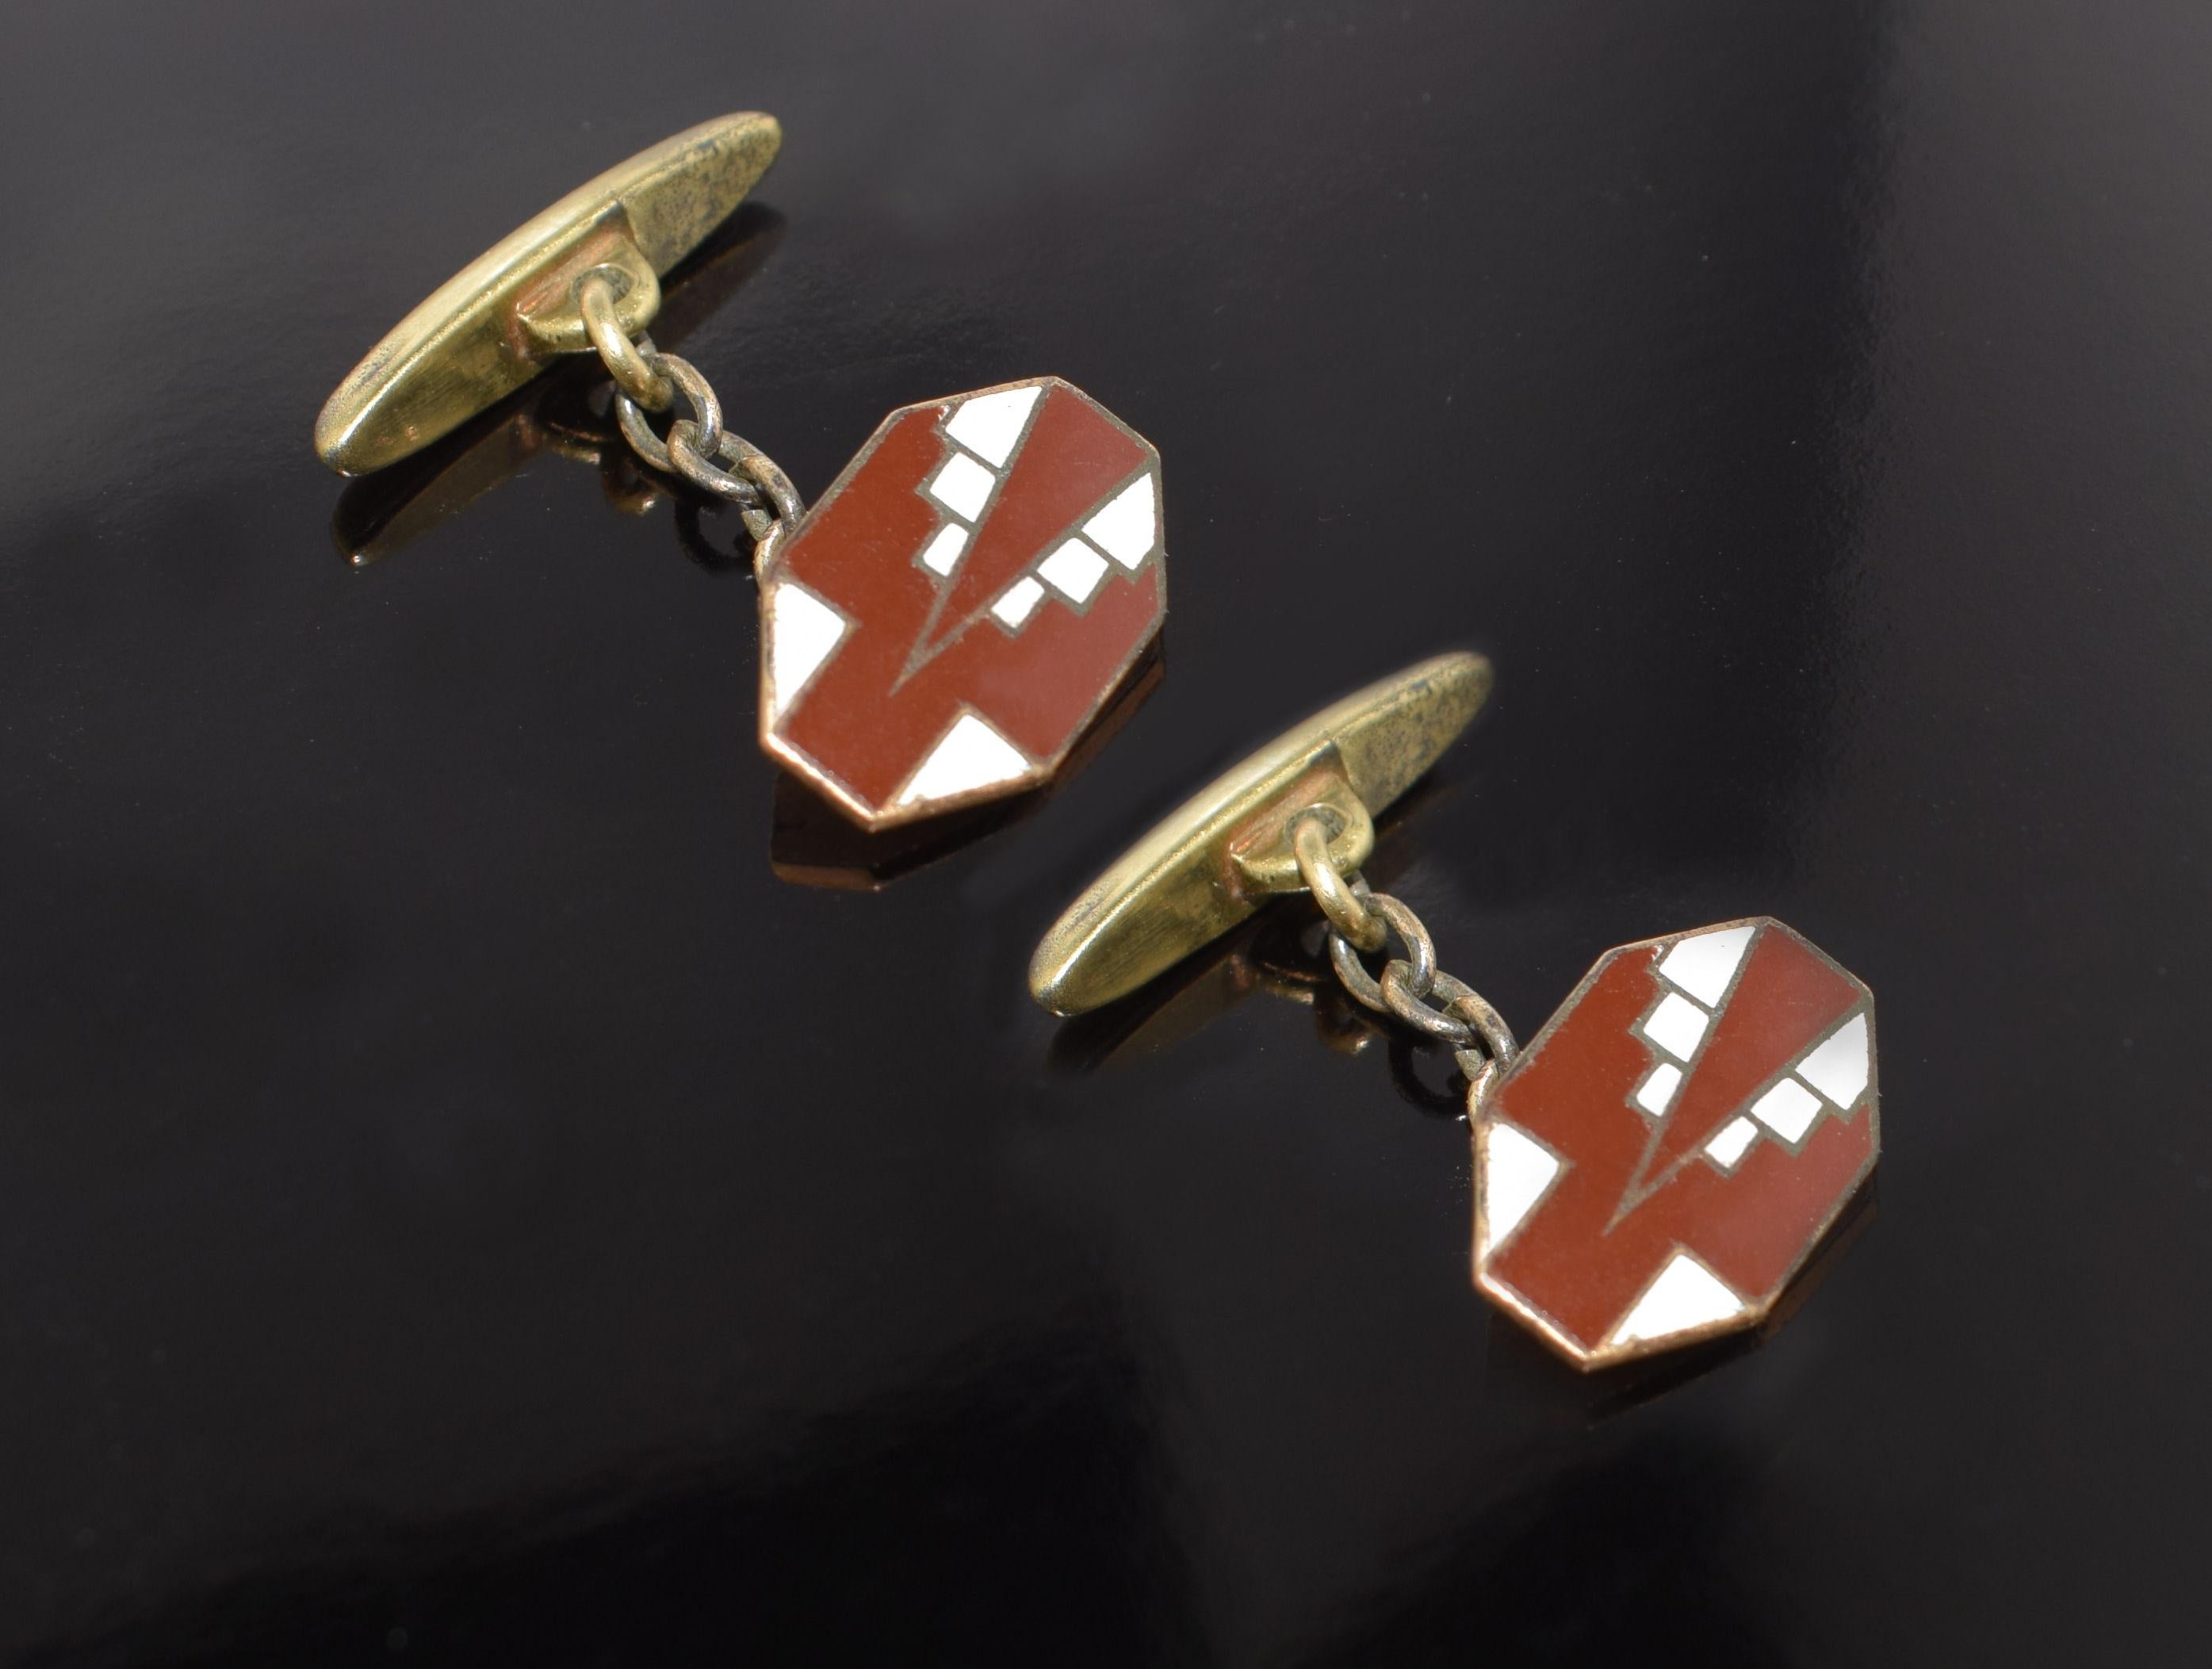 A rare find are these totally original enamel cufflinks from the 1930's. Great Art Deco geometric styling and colour, can't be confused with any other era can they? Condition is great with minimal signs of age. Ideal for todays dapper gentleman.